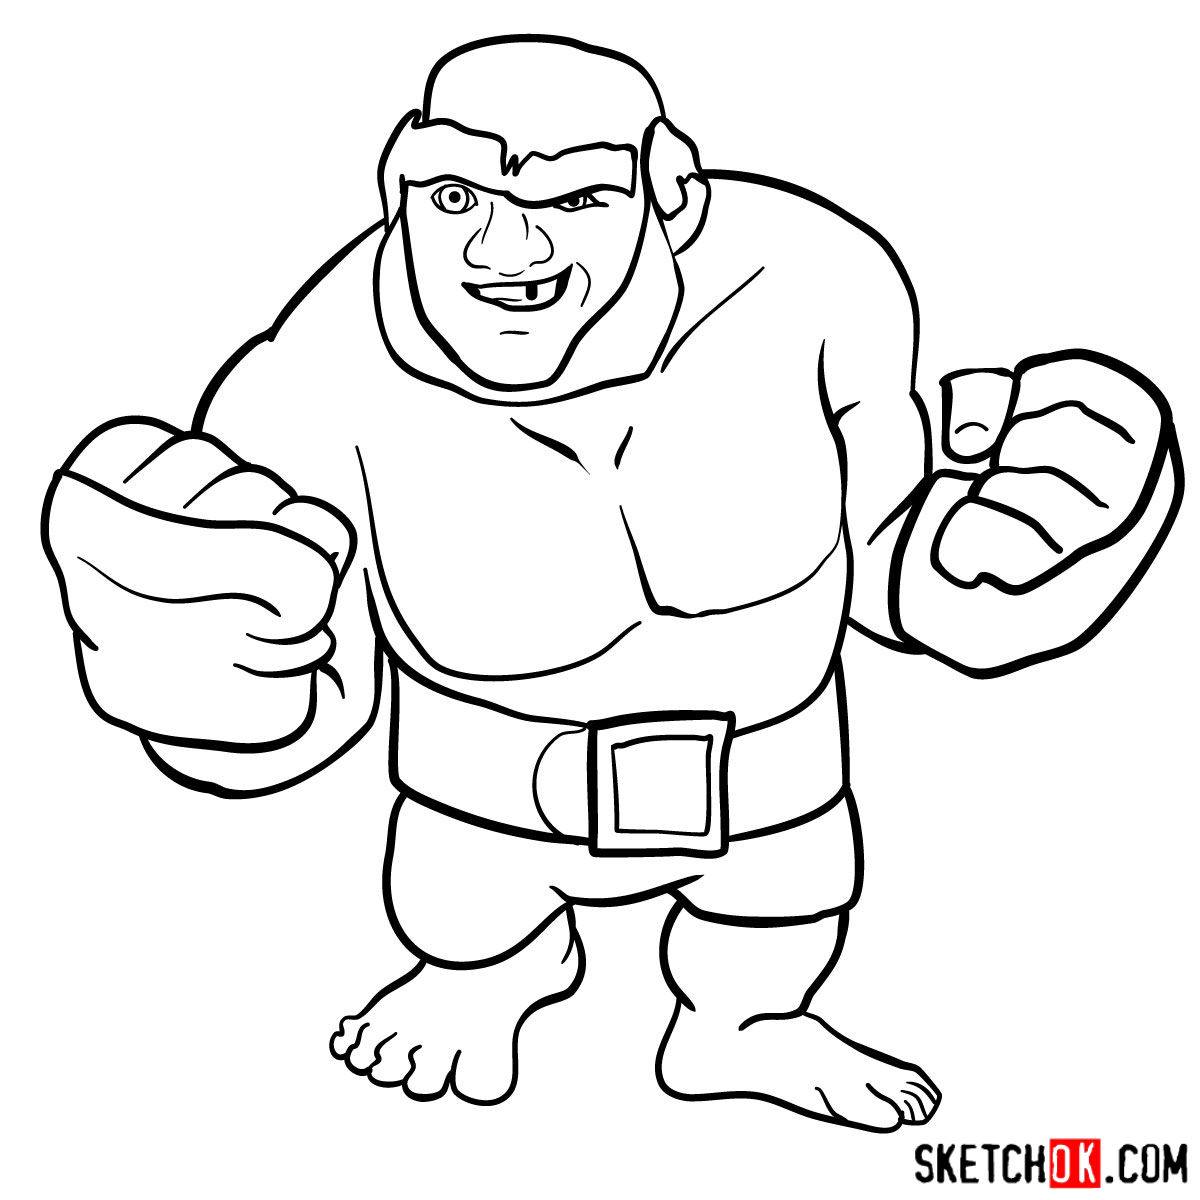 How to draw Boxer Giant from Clash of Clans - step 11